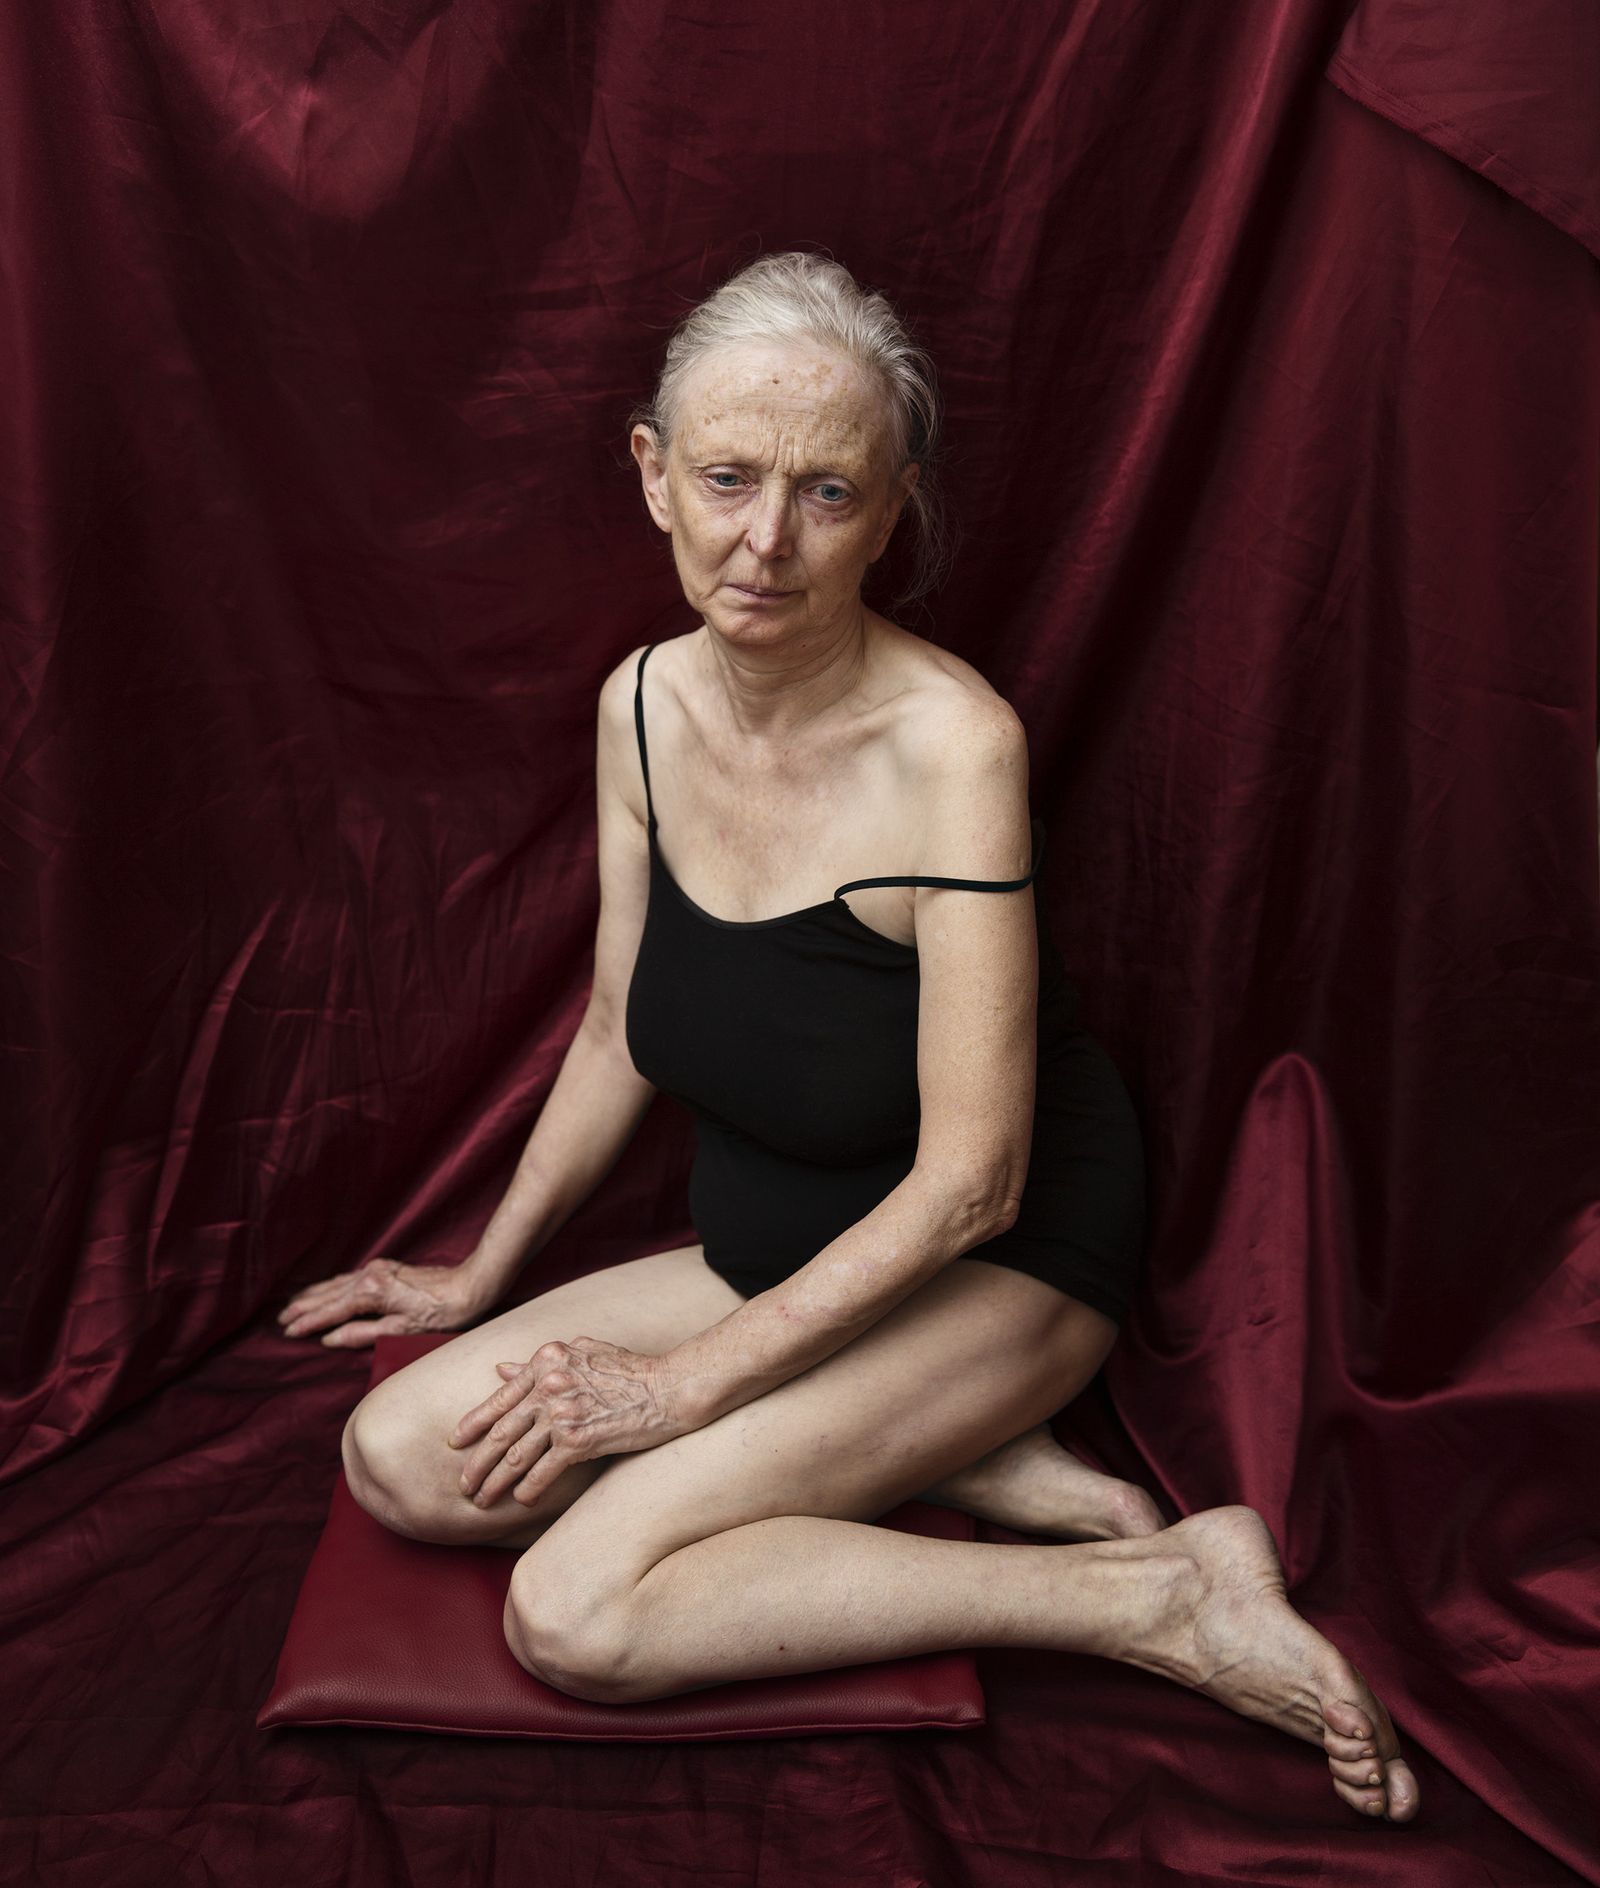 © Niko Giovanni Coniglio - Image from the Daniela, portrait of my mother photography project